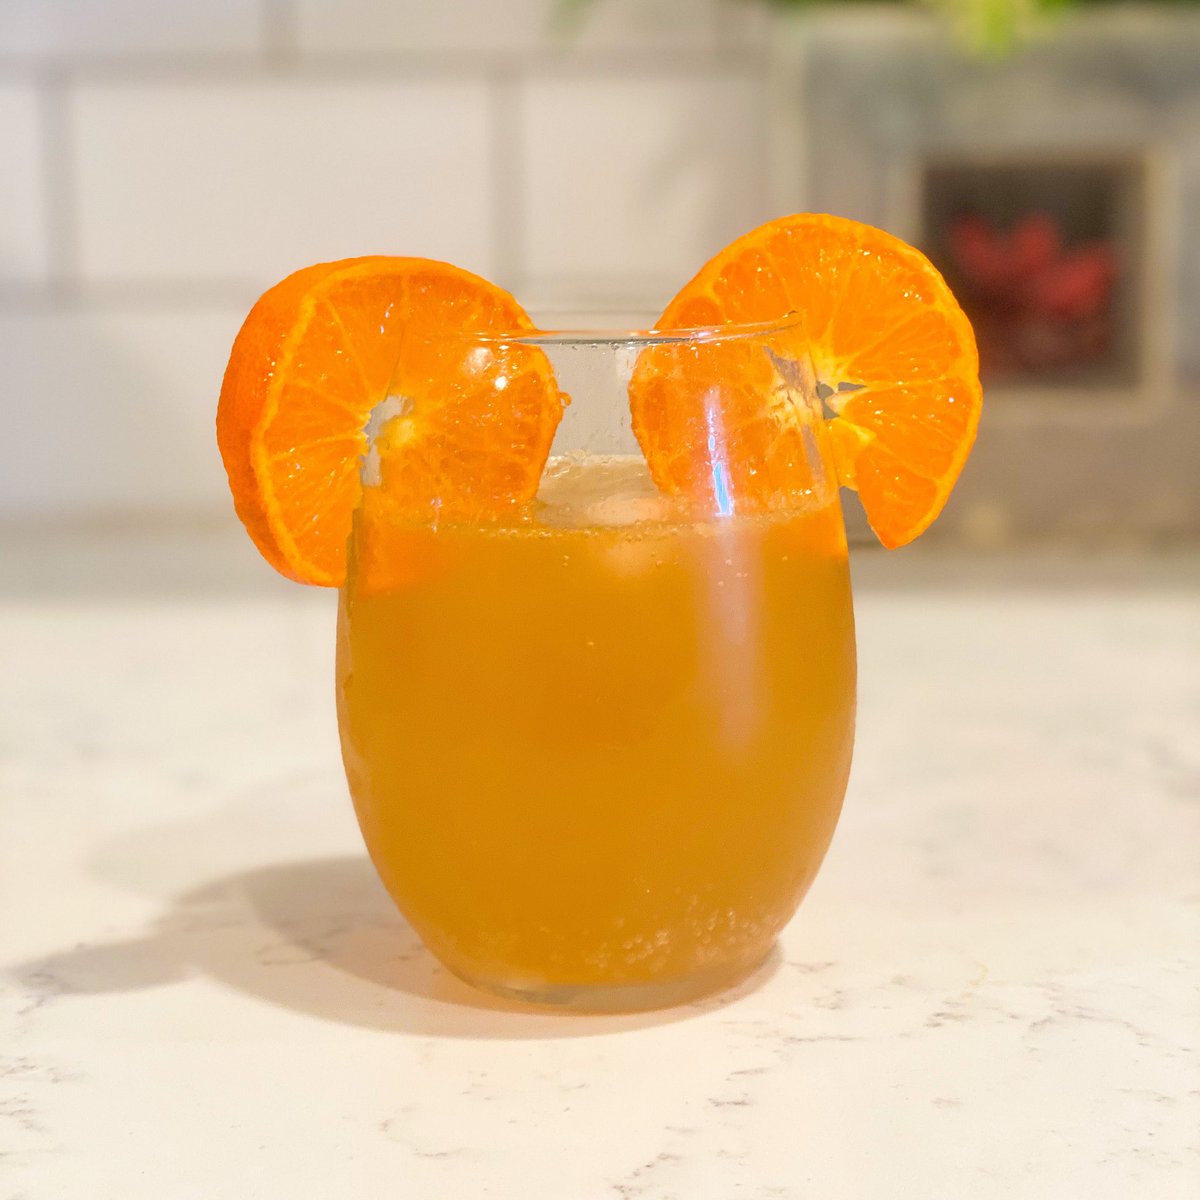 A quick, citrusy pick me up today! Fizzy lemon grapefruit refresher with a squeeze of clementine. Non-alcoholic.